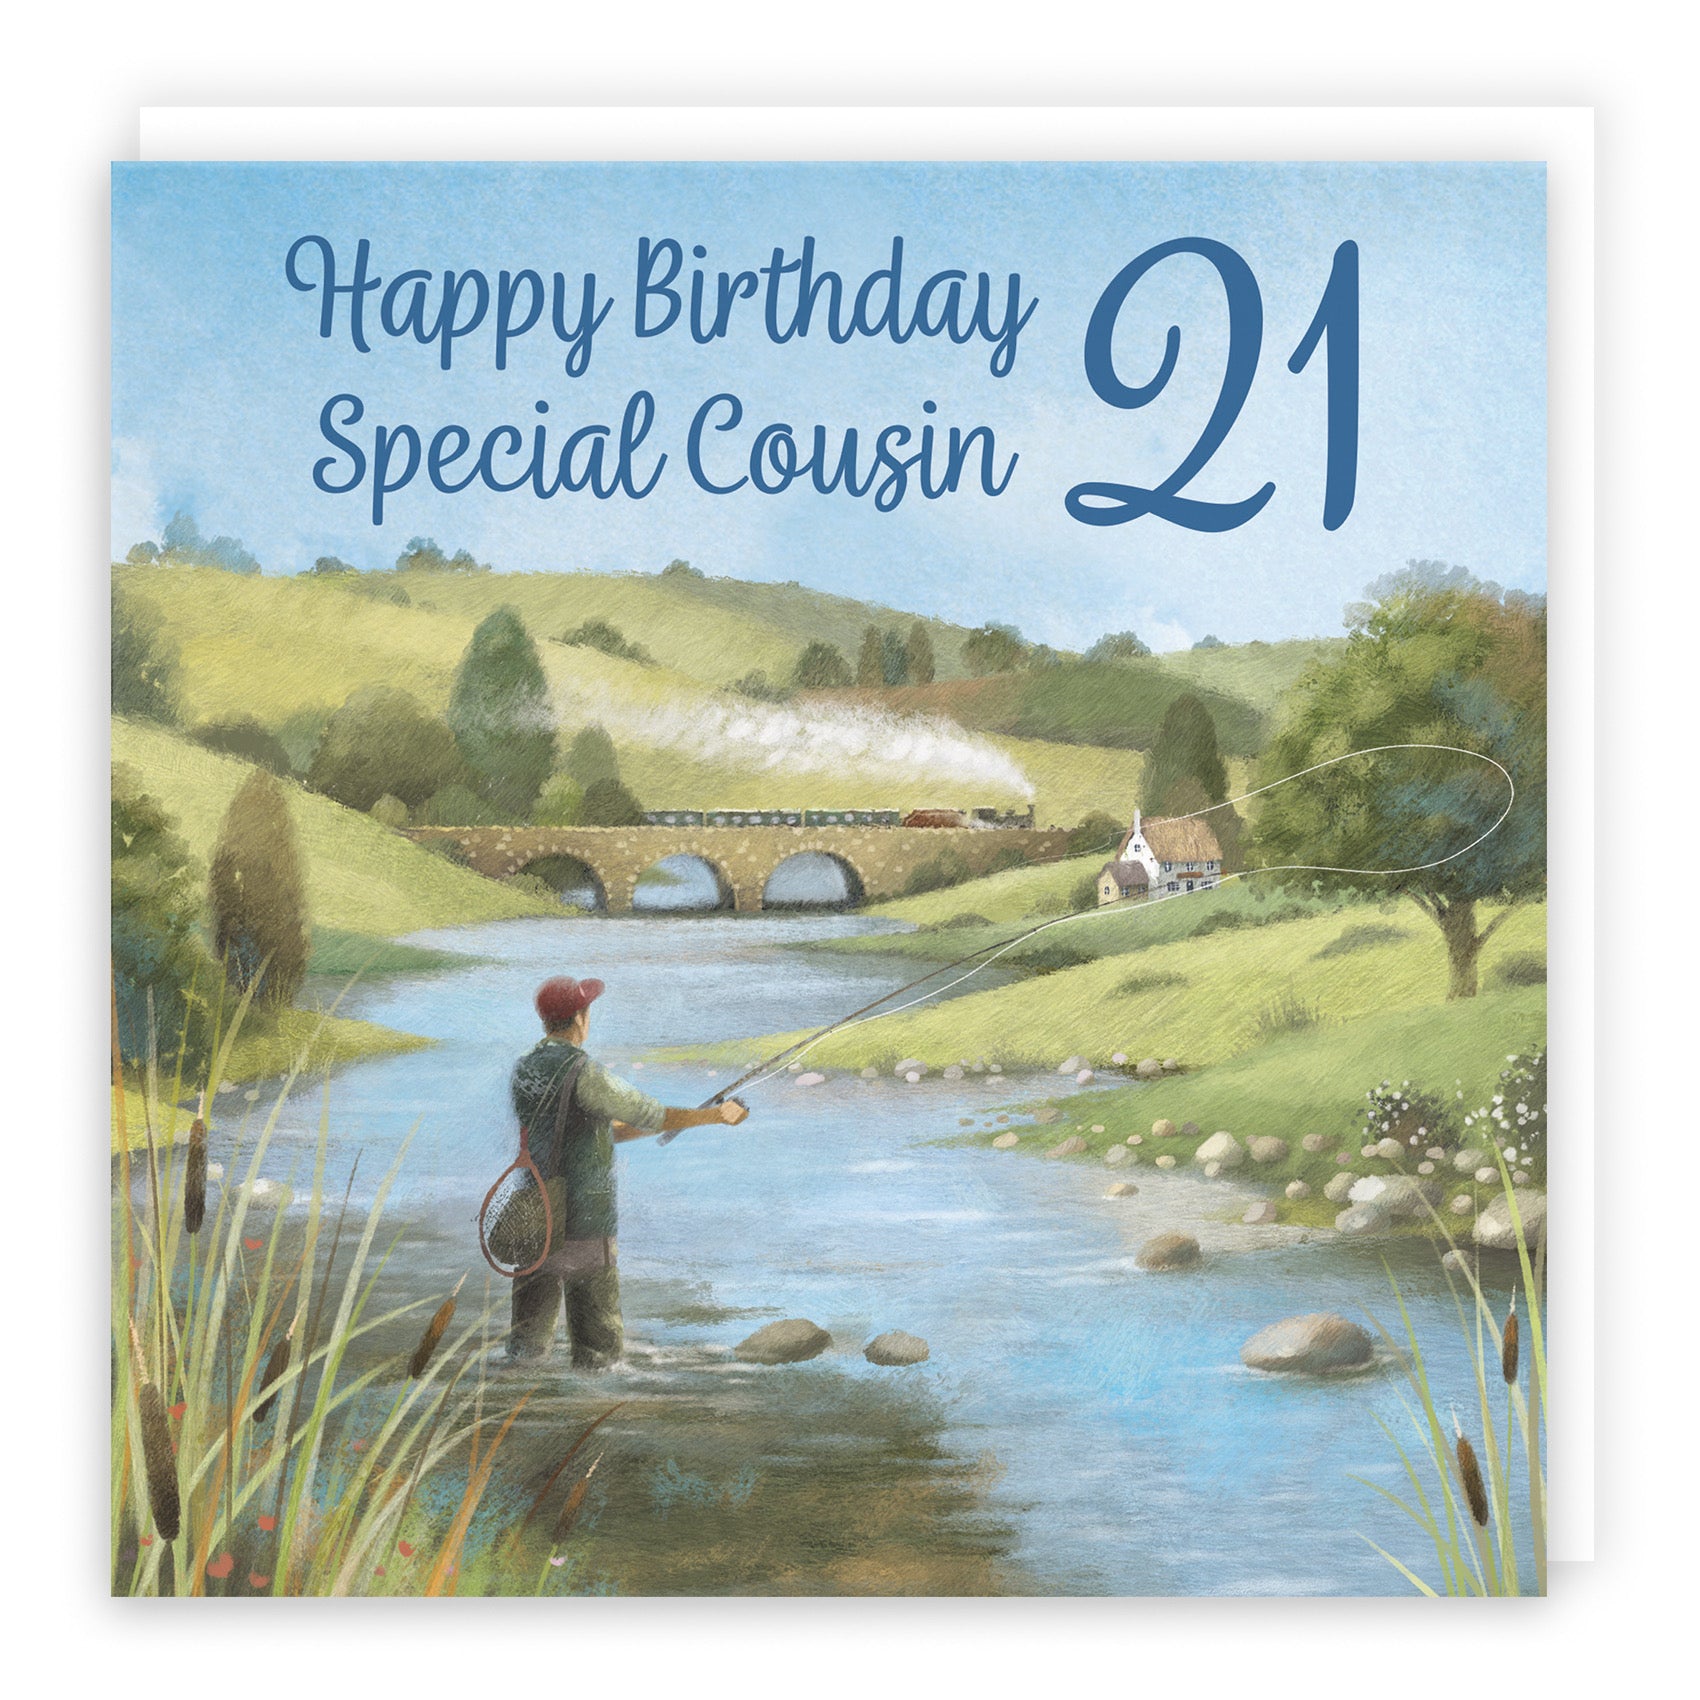 21st Cousin Fly Fishing Birthday Card Milo's Gallery - Default Title (B0CQWS8NW8)